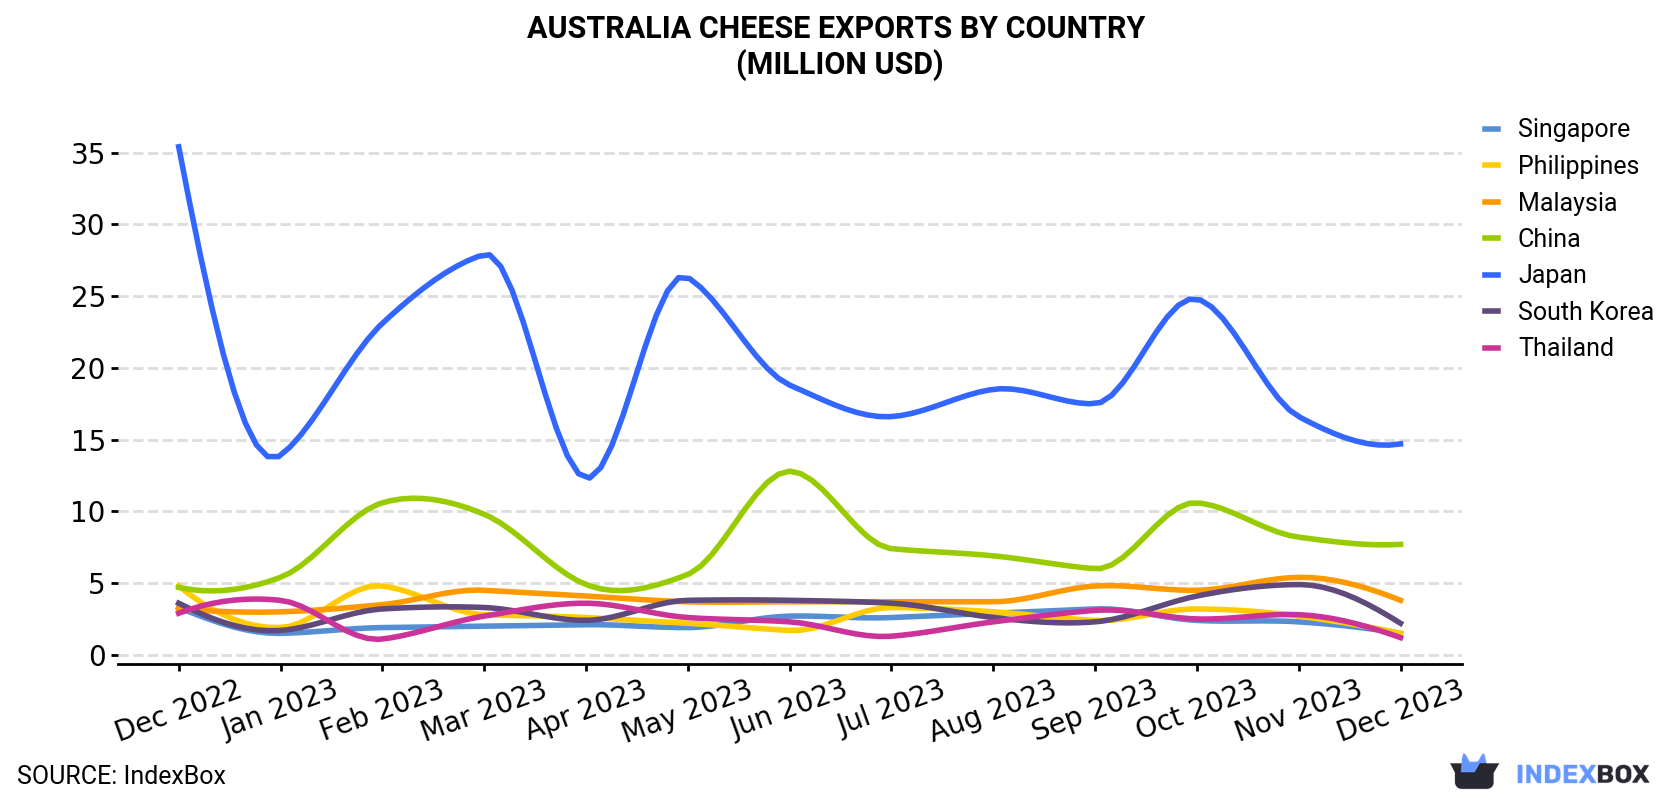 Australia Cheese Exports By Country (Million USD)